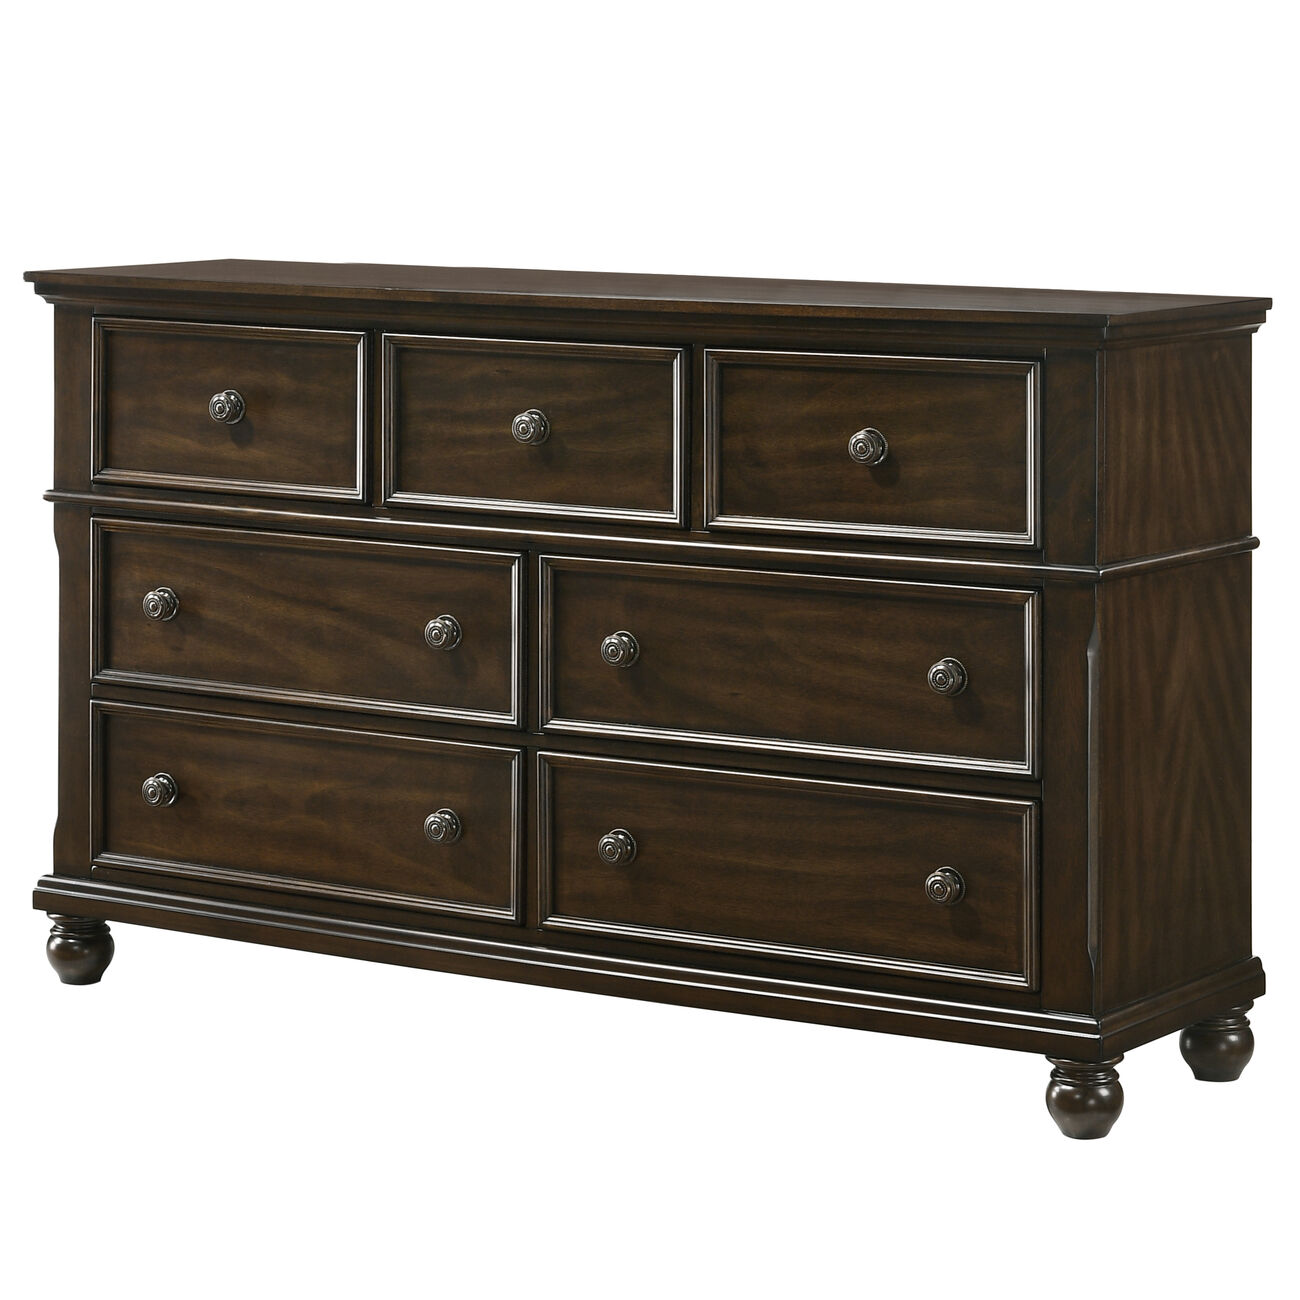 Wooden Seven Drawer Dresser with Bun Feet and Metal Knobs, Brown